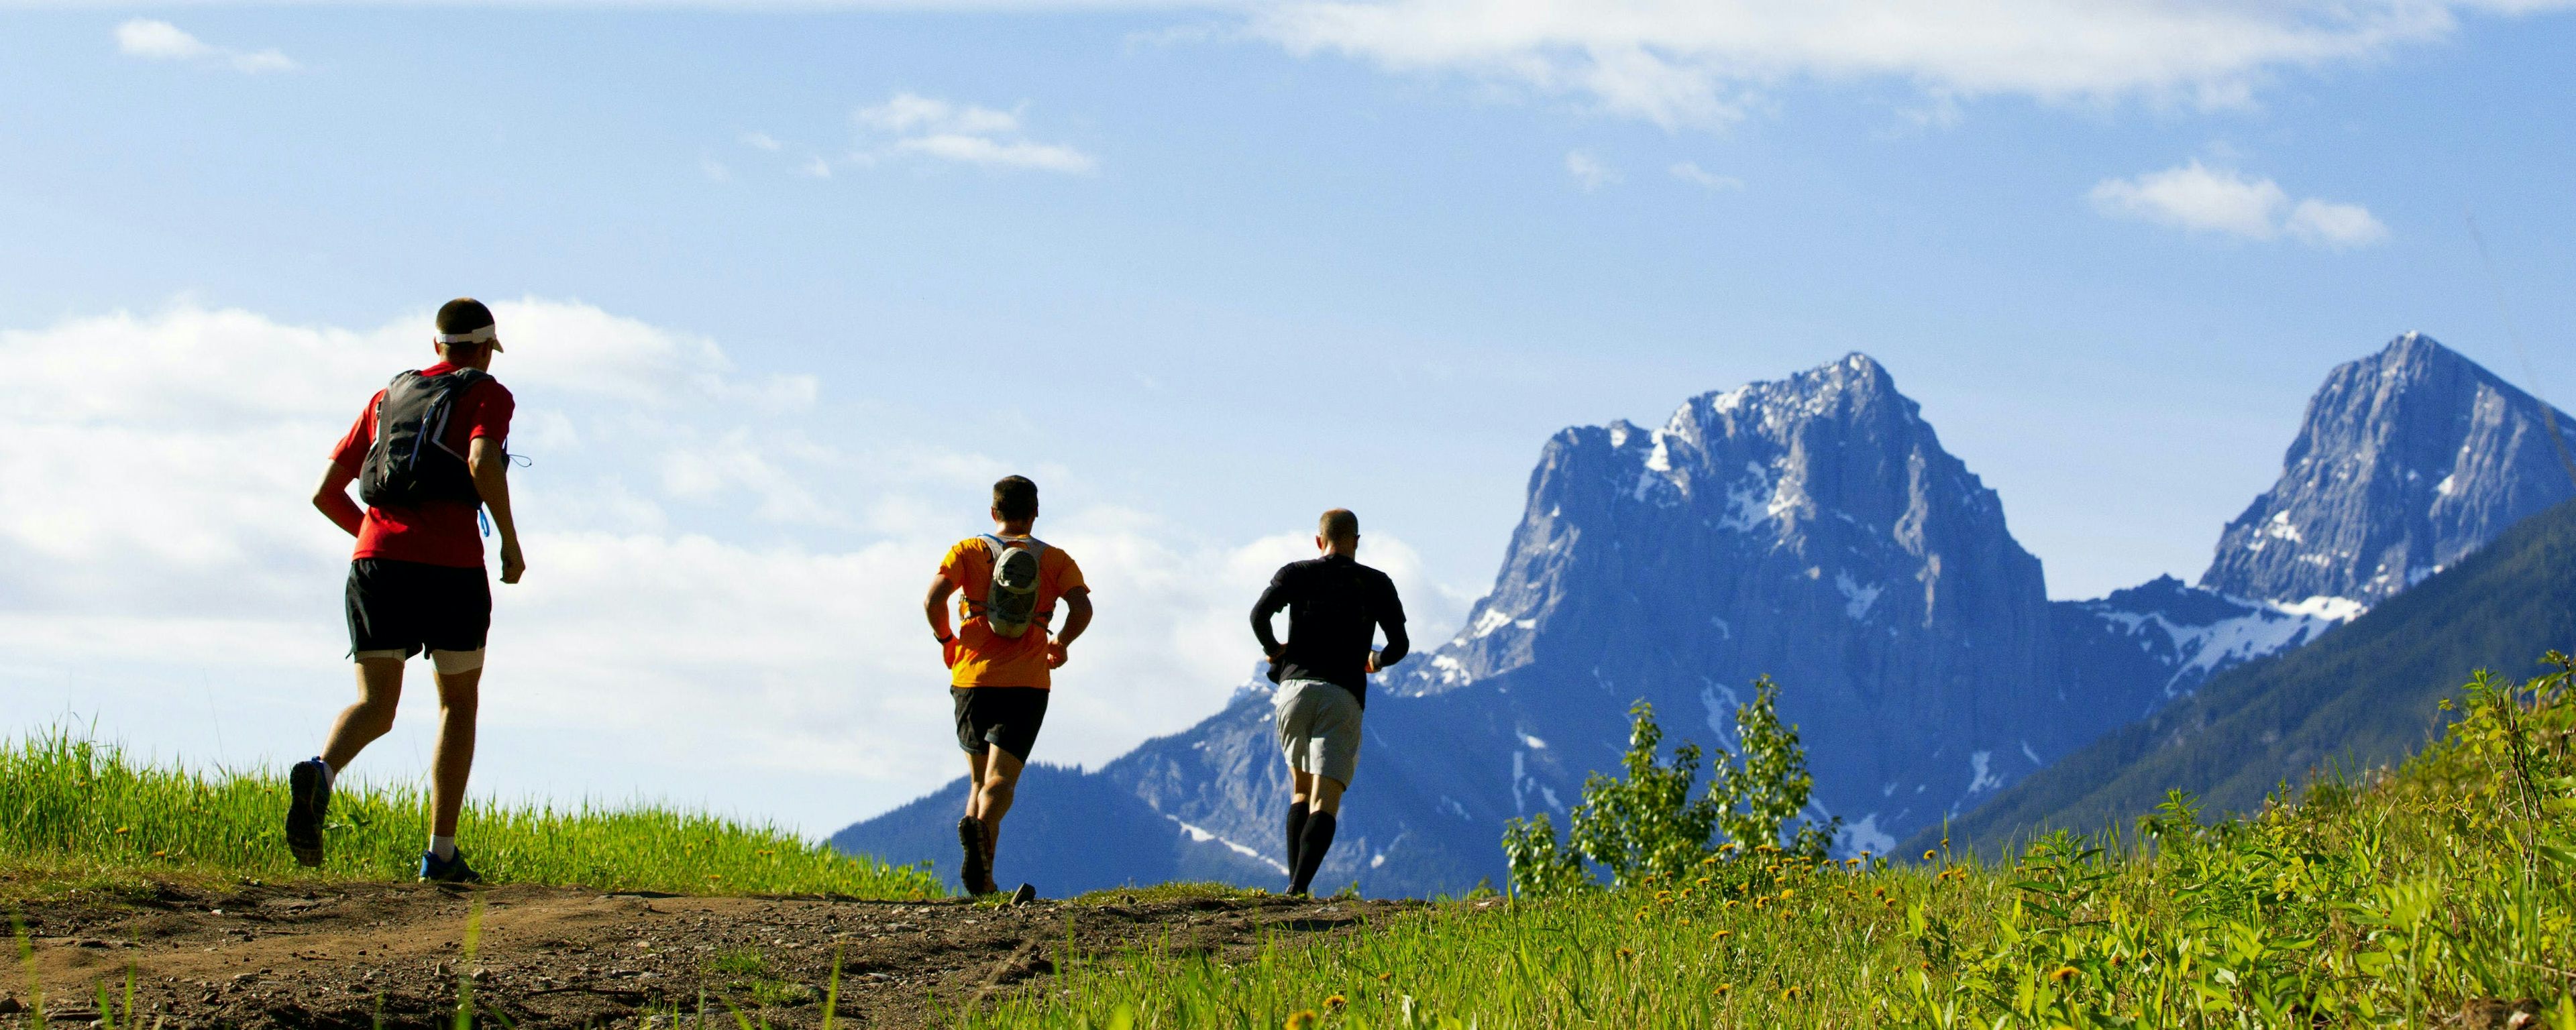 Three trail runners running on a grassy trail towards mountain peaks